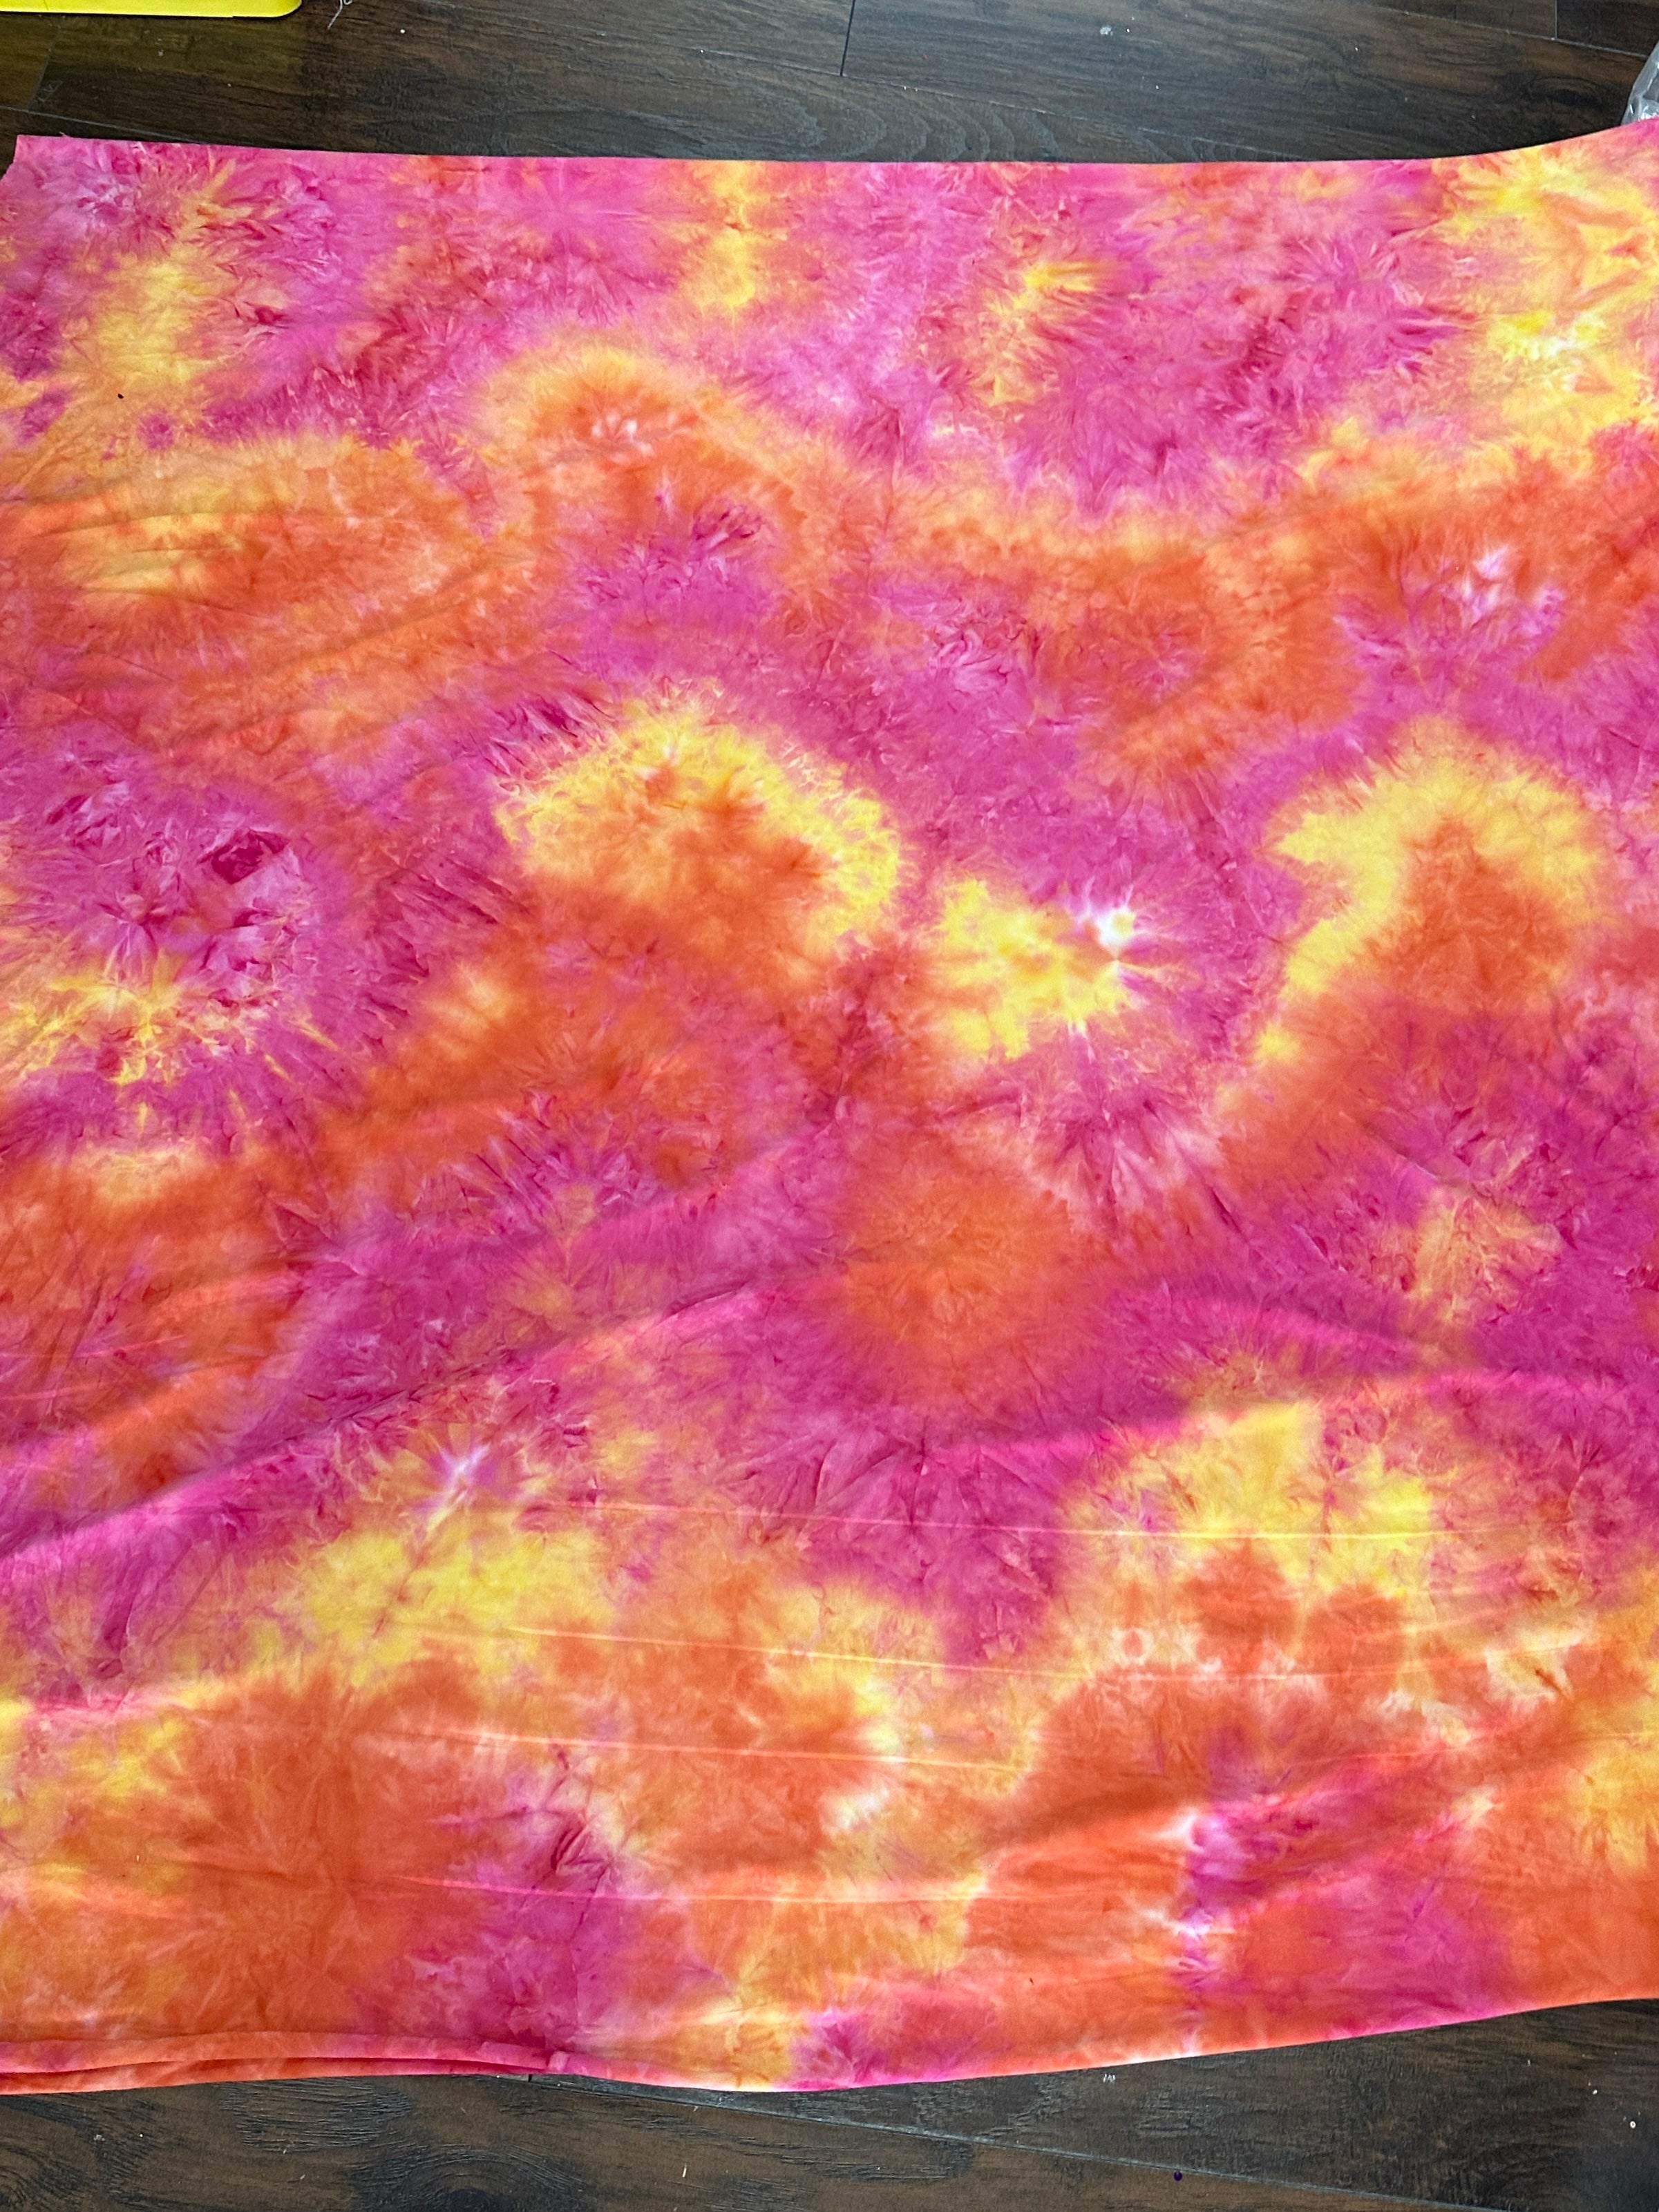  Hot Pink and Yellow Tie Dye Jersey Knit, tie dye jersey knit for woman, tie dye jersey knit for party wear, tie dye jersey knit for gown, tie dye jersey knit for bride, tie dye jersey knit on discount, tie dye jersey knit on sale, premium tie dye jersey knit 